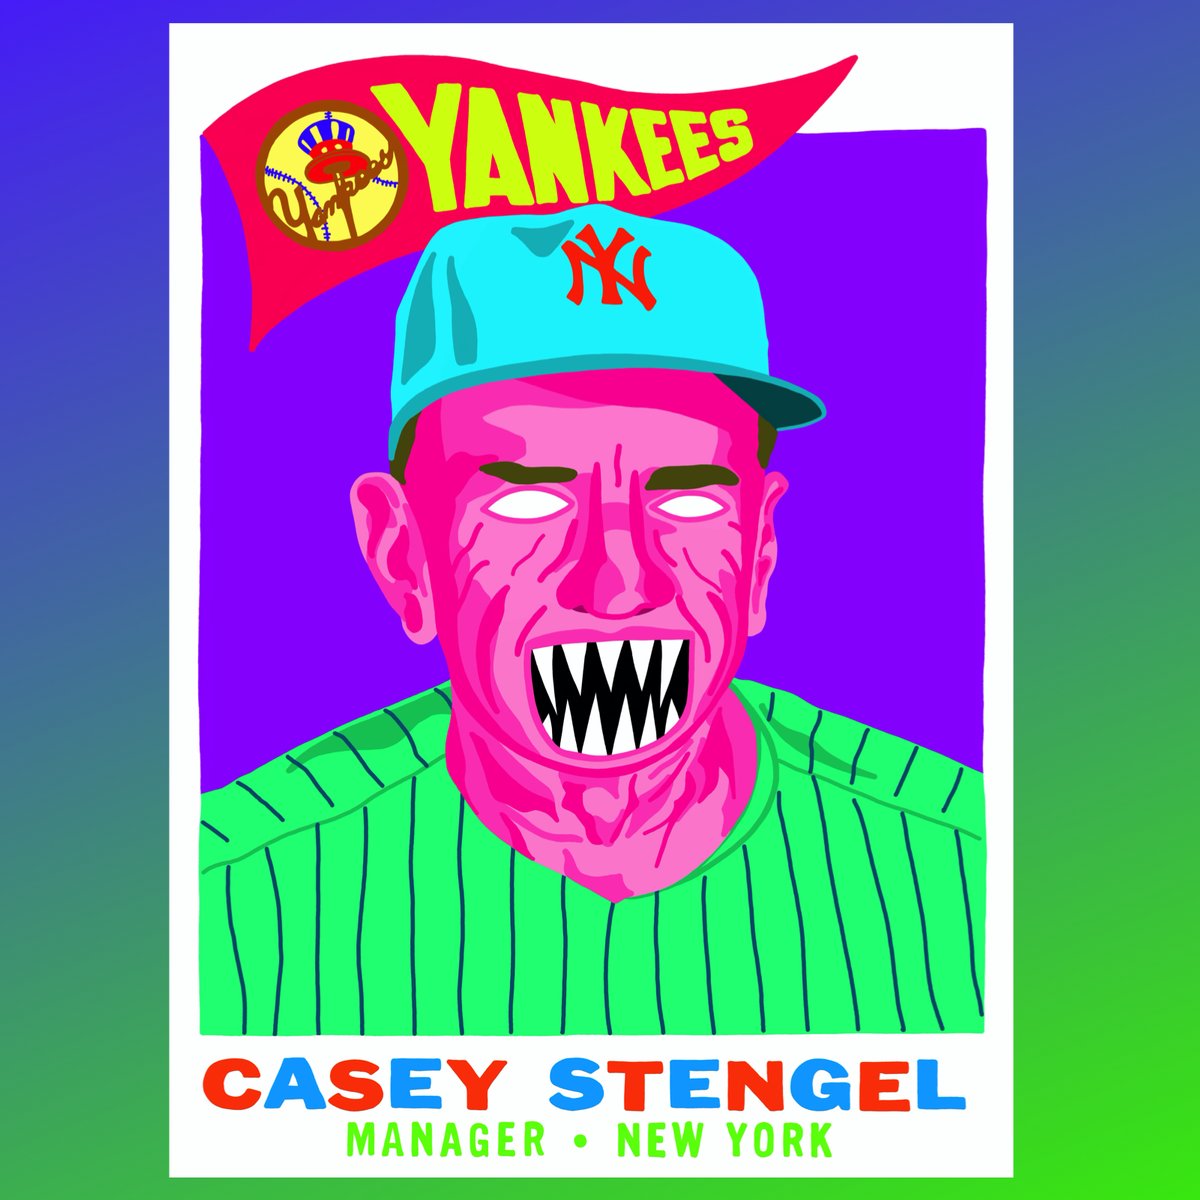 Today's #NeonTerror is #HallofFame manager, #CaseyStengel, and his 1960 #Topps card. #Stengel was a 9x #WorldSeries champion as player and manager. Majority of those coming from managing the impressive #NewYork #Yankees dynasty.  #CardArt #NewYorkYankees #TheOlPerfessor